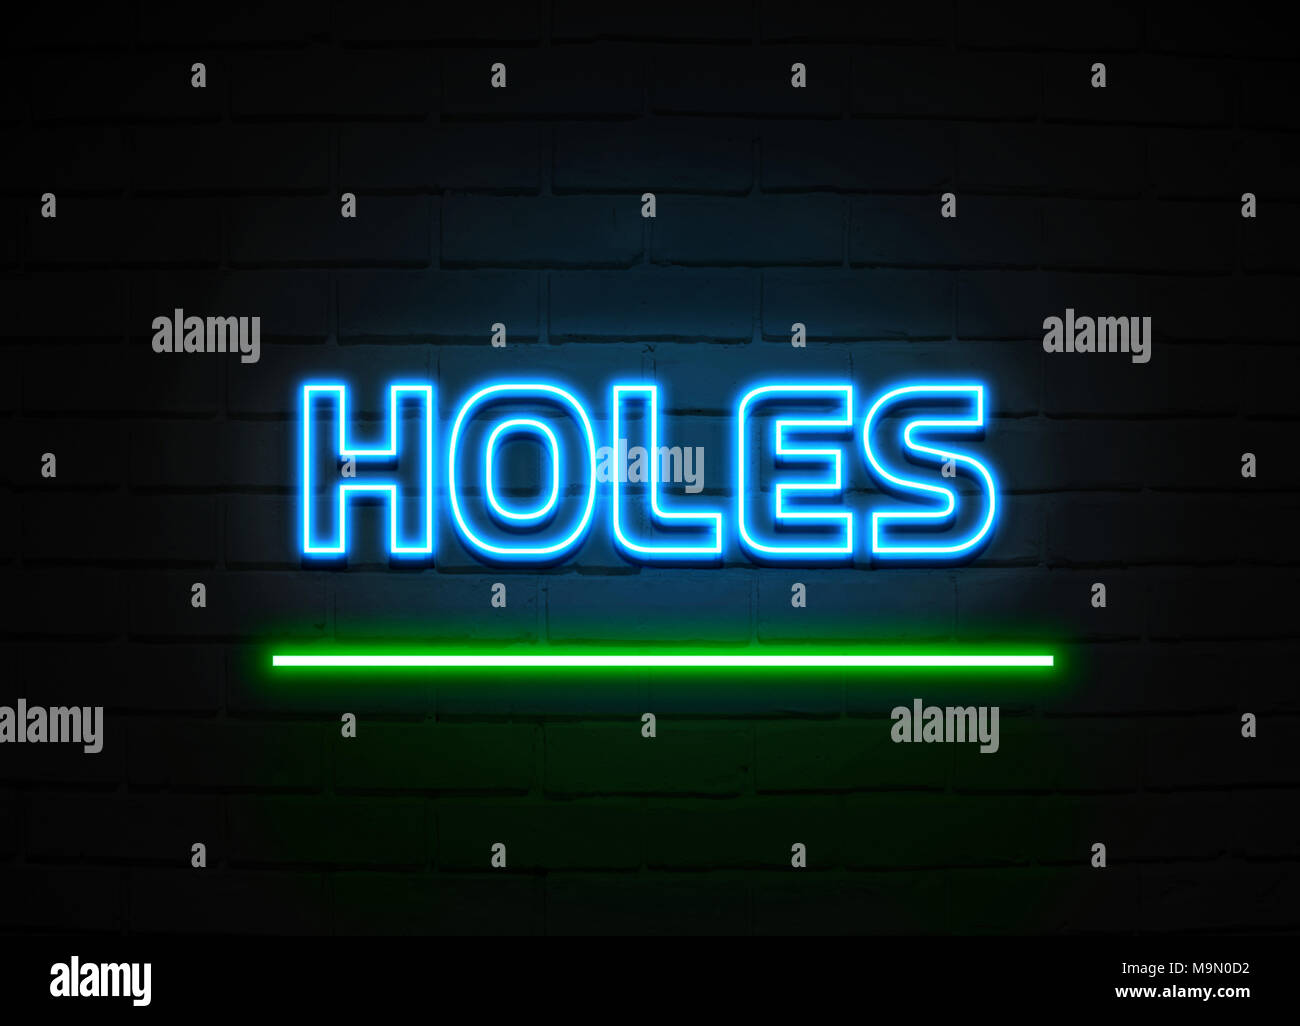 Holes neon sign - Glowing Neon Sign on brickwall wall - 3D rendered royalty free stock illustration. Stock Photo